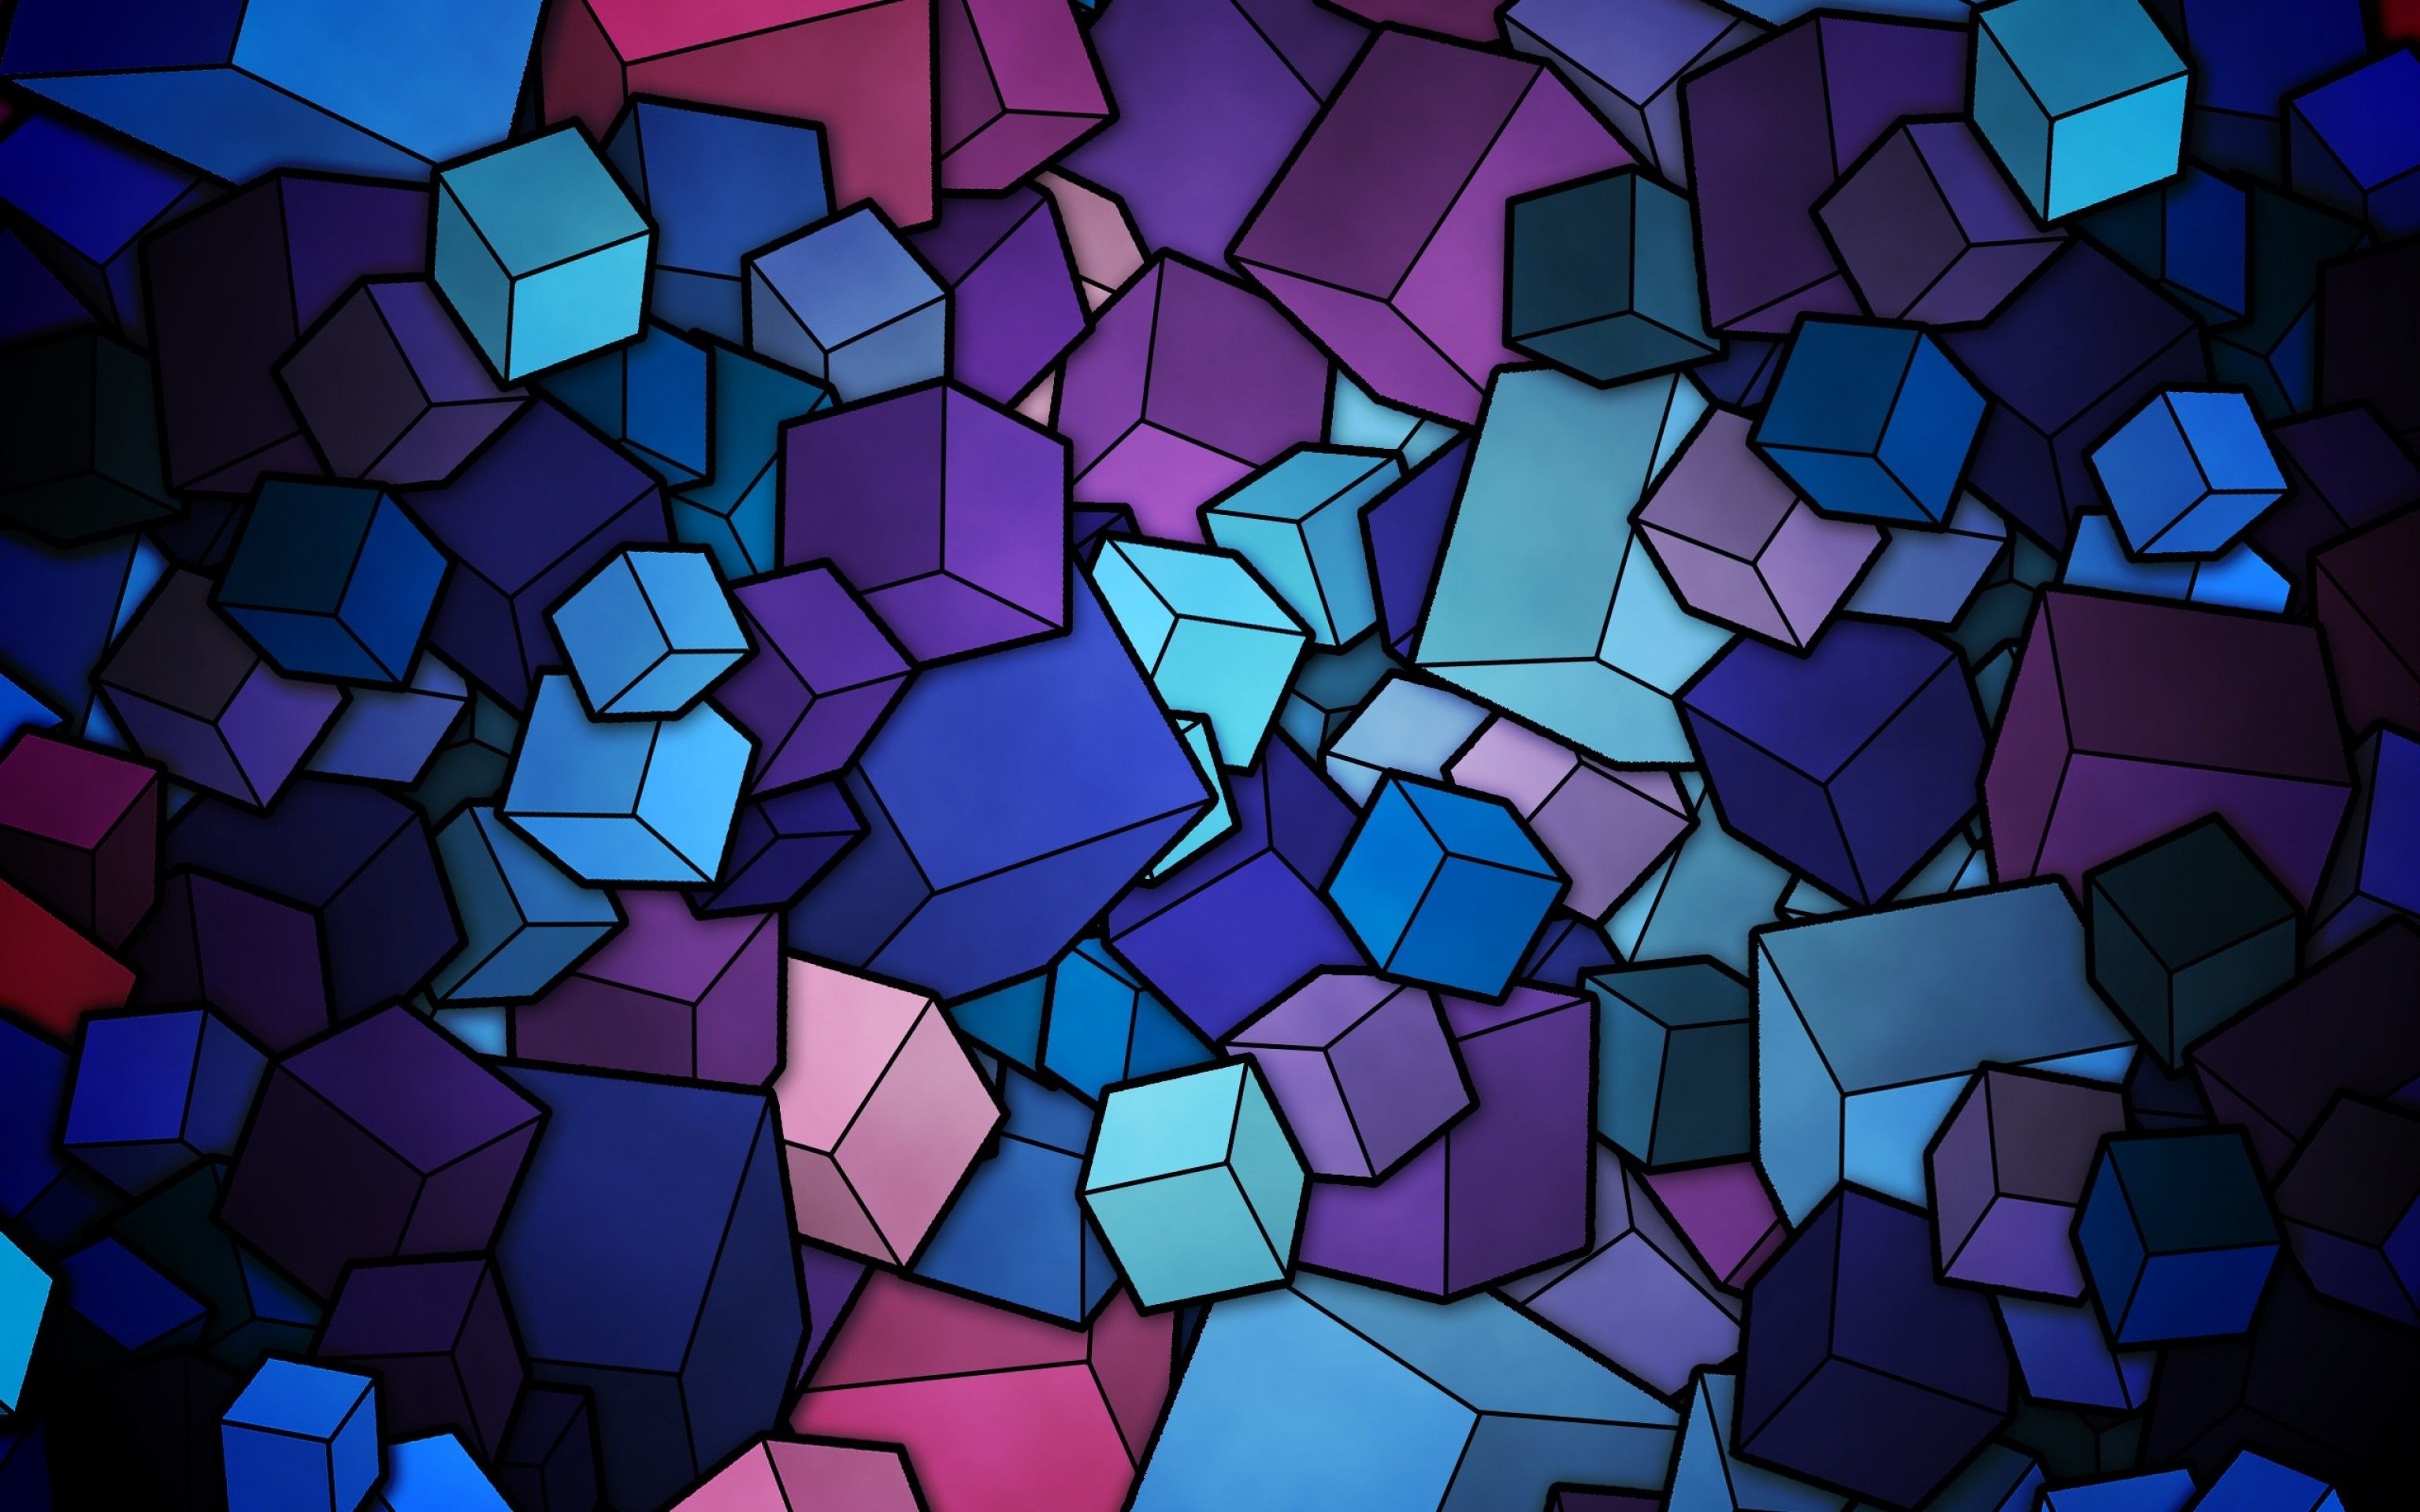 Free download Abstract Cube Phone Wallpaper HD Image Full Light Blue Cubes [3072x1920] for your Desktop, Mobile & Tablet. Explore Wallpaper Smartphone. Smartphone Wallpaper, Wallpaper Smartphone, Smartphone Wallpaper HD